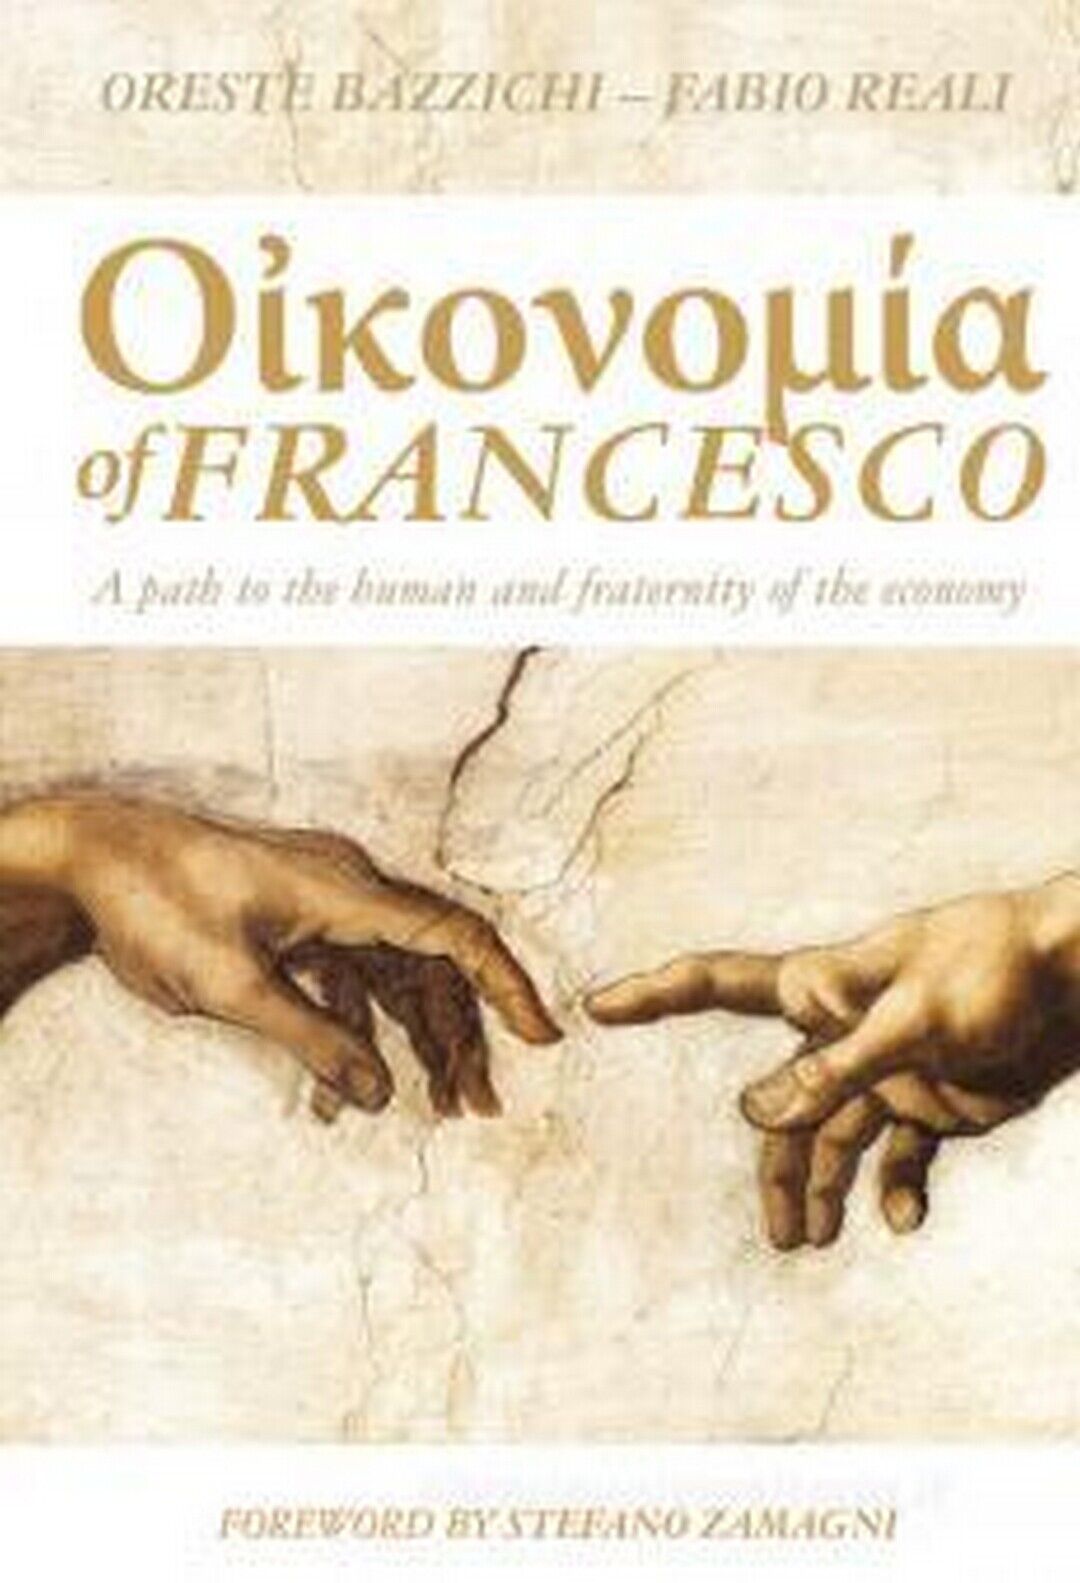 ????????? di Francesco. A path to the human and fraternity of the economy, 2021